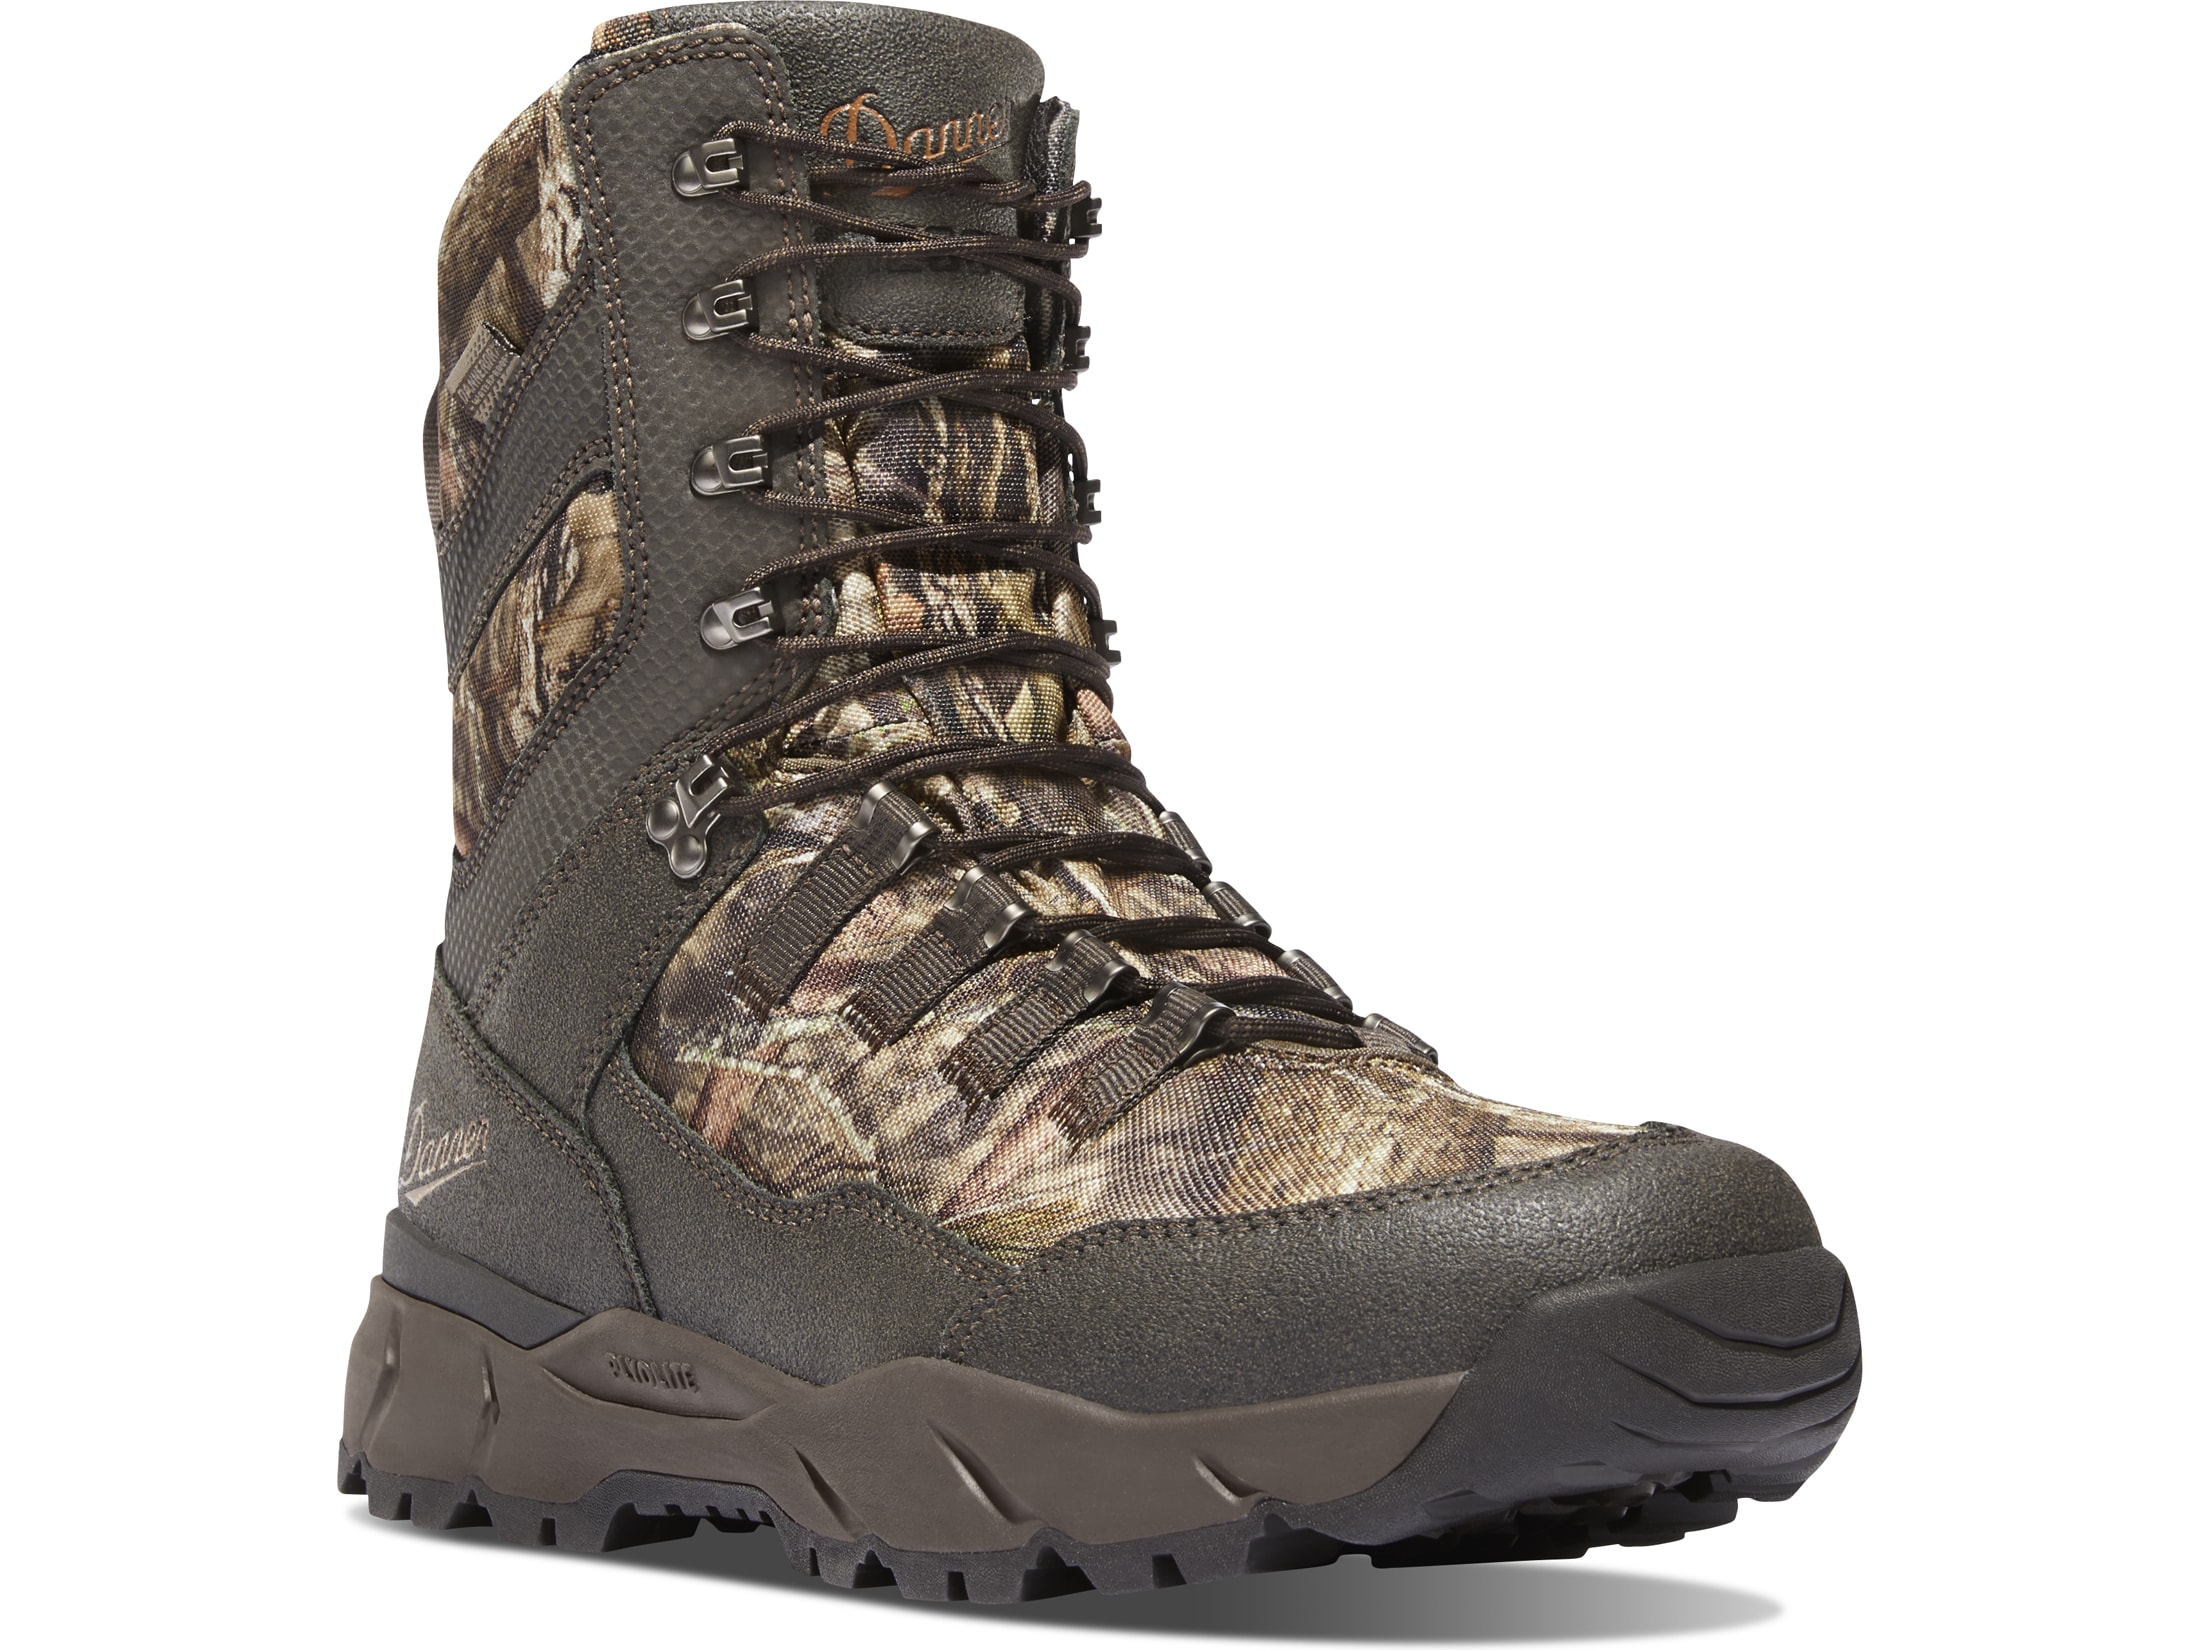 Danner Vital 8 400 Gram Insulated Hunting Boots Leather/Nylon Mossy